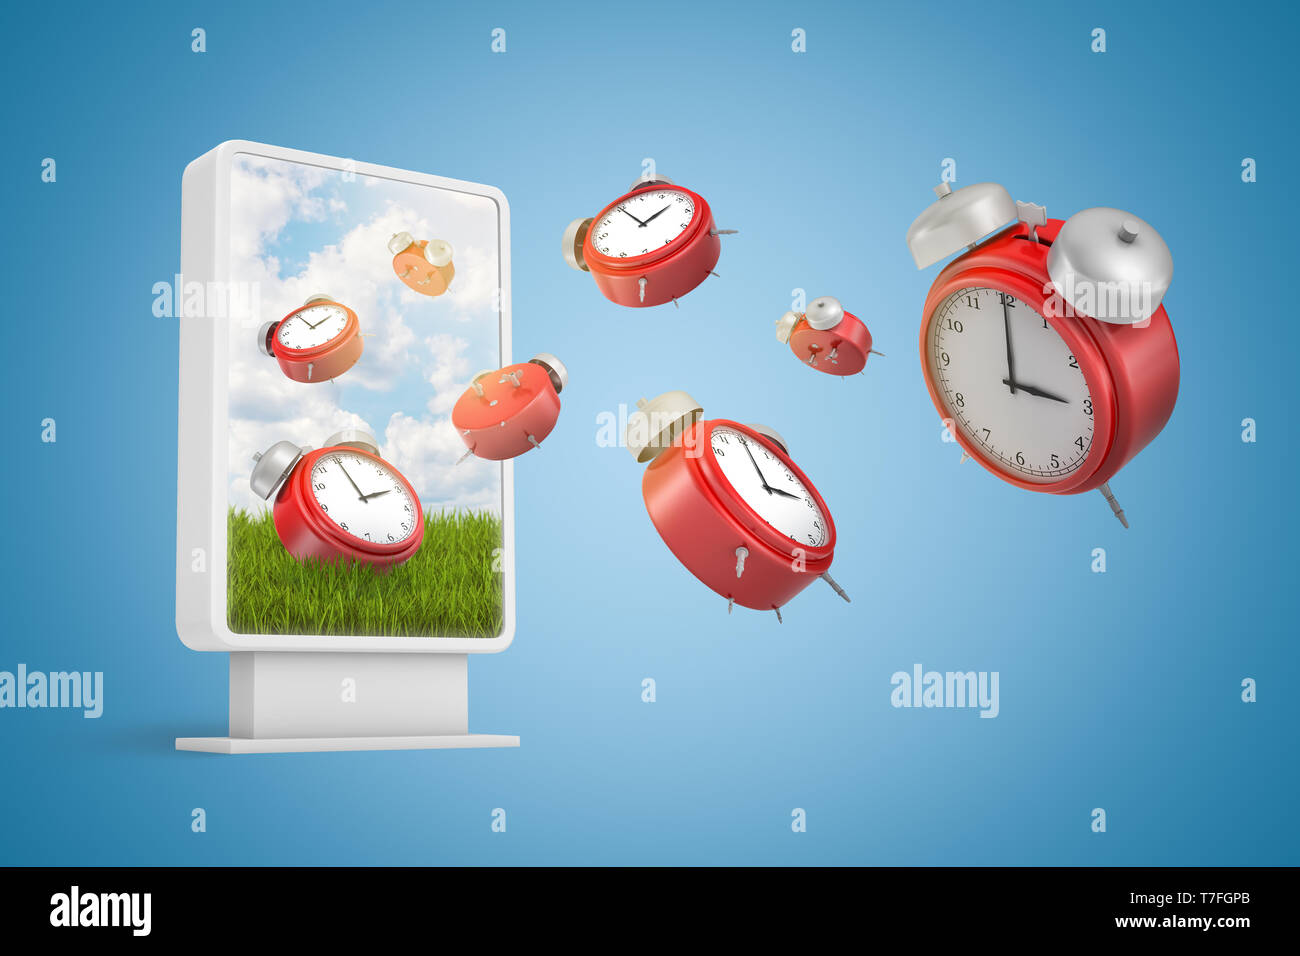 3d rendering of many red alarm clocks flying out from information display screen on gradient blue background. Stock Photo